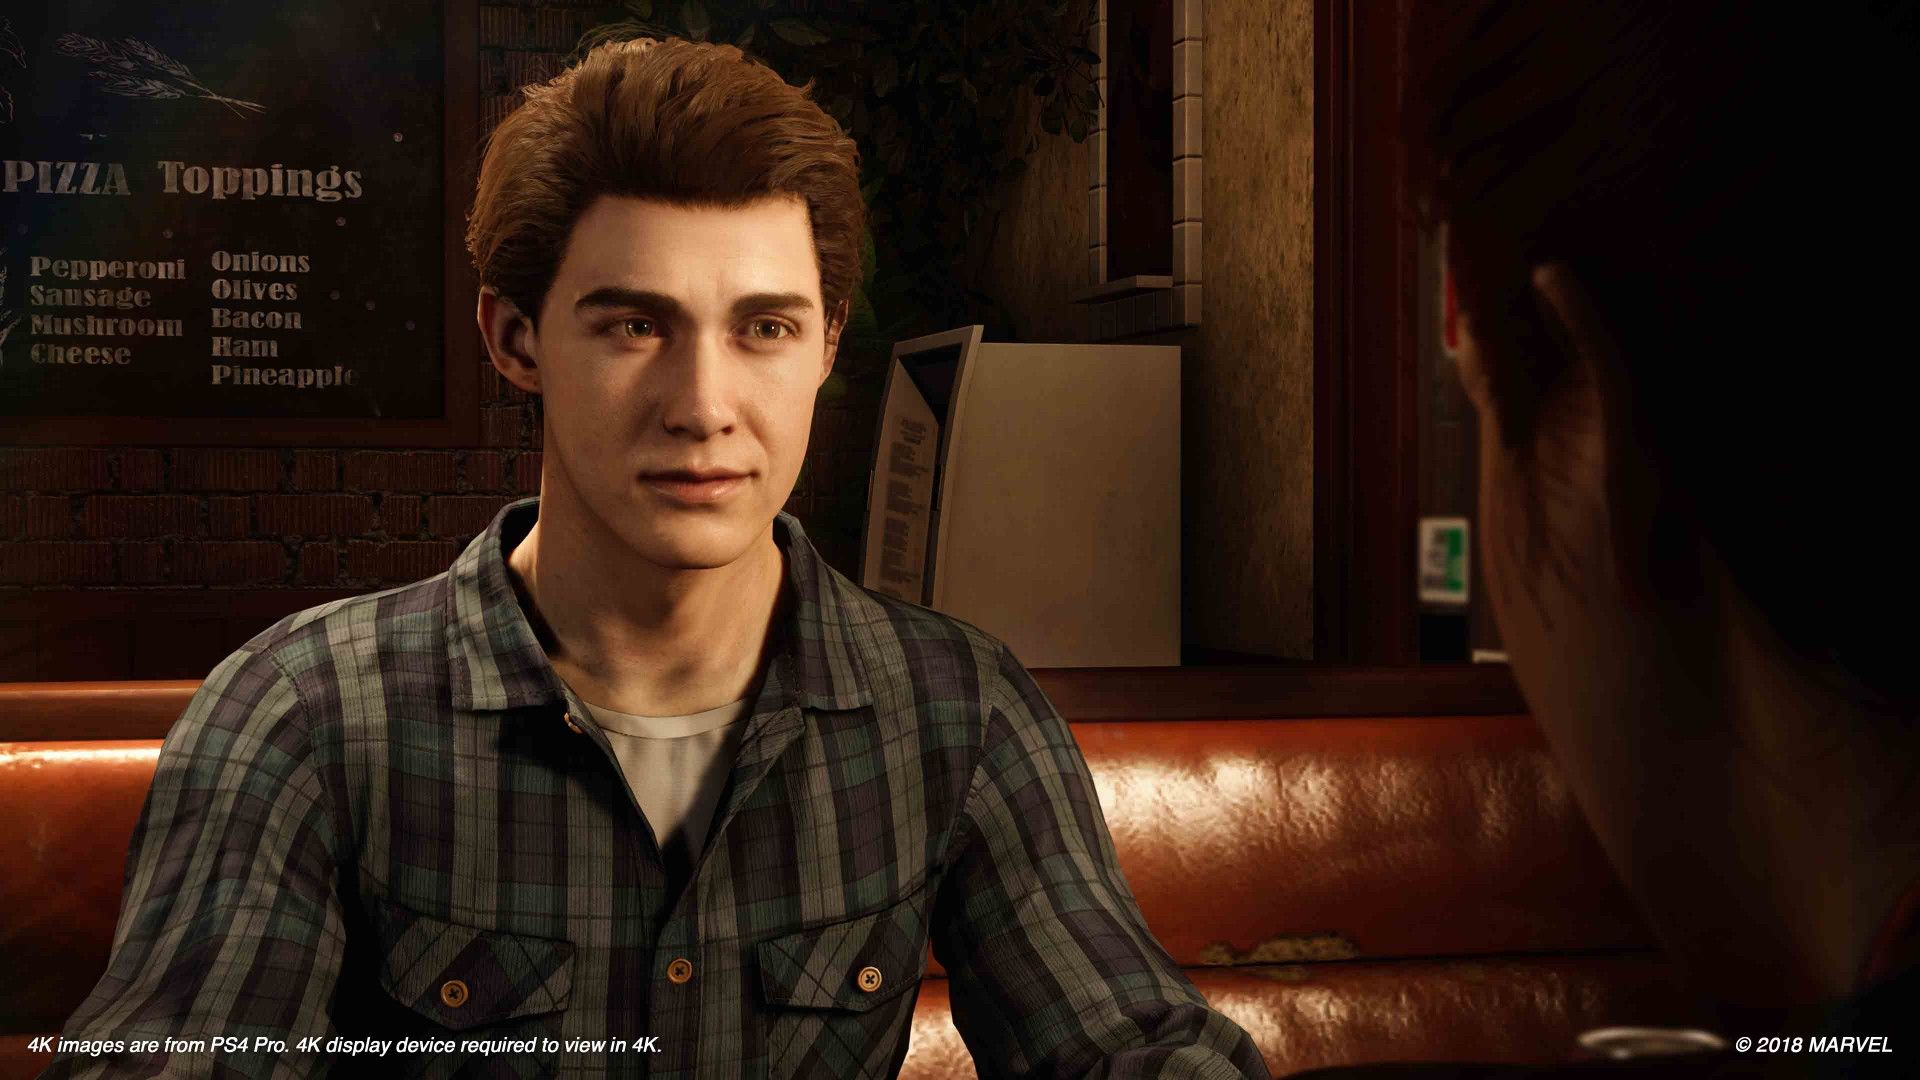 real ages of video game characters - Peter Parker